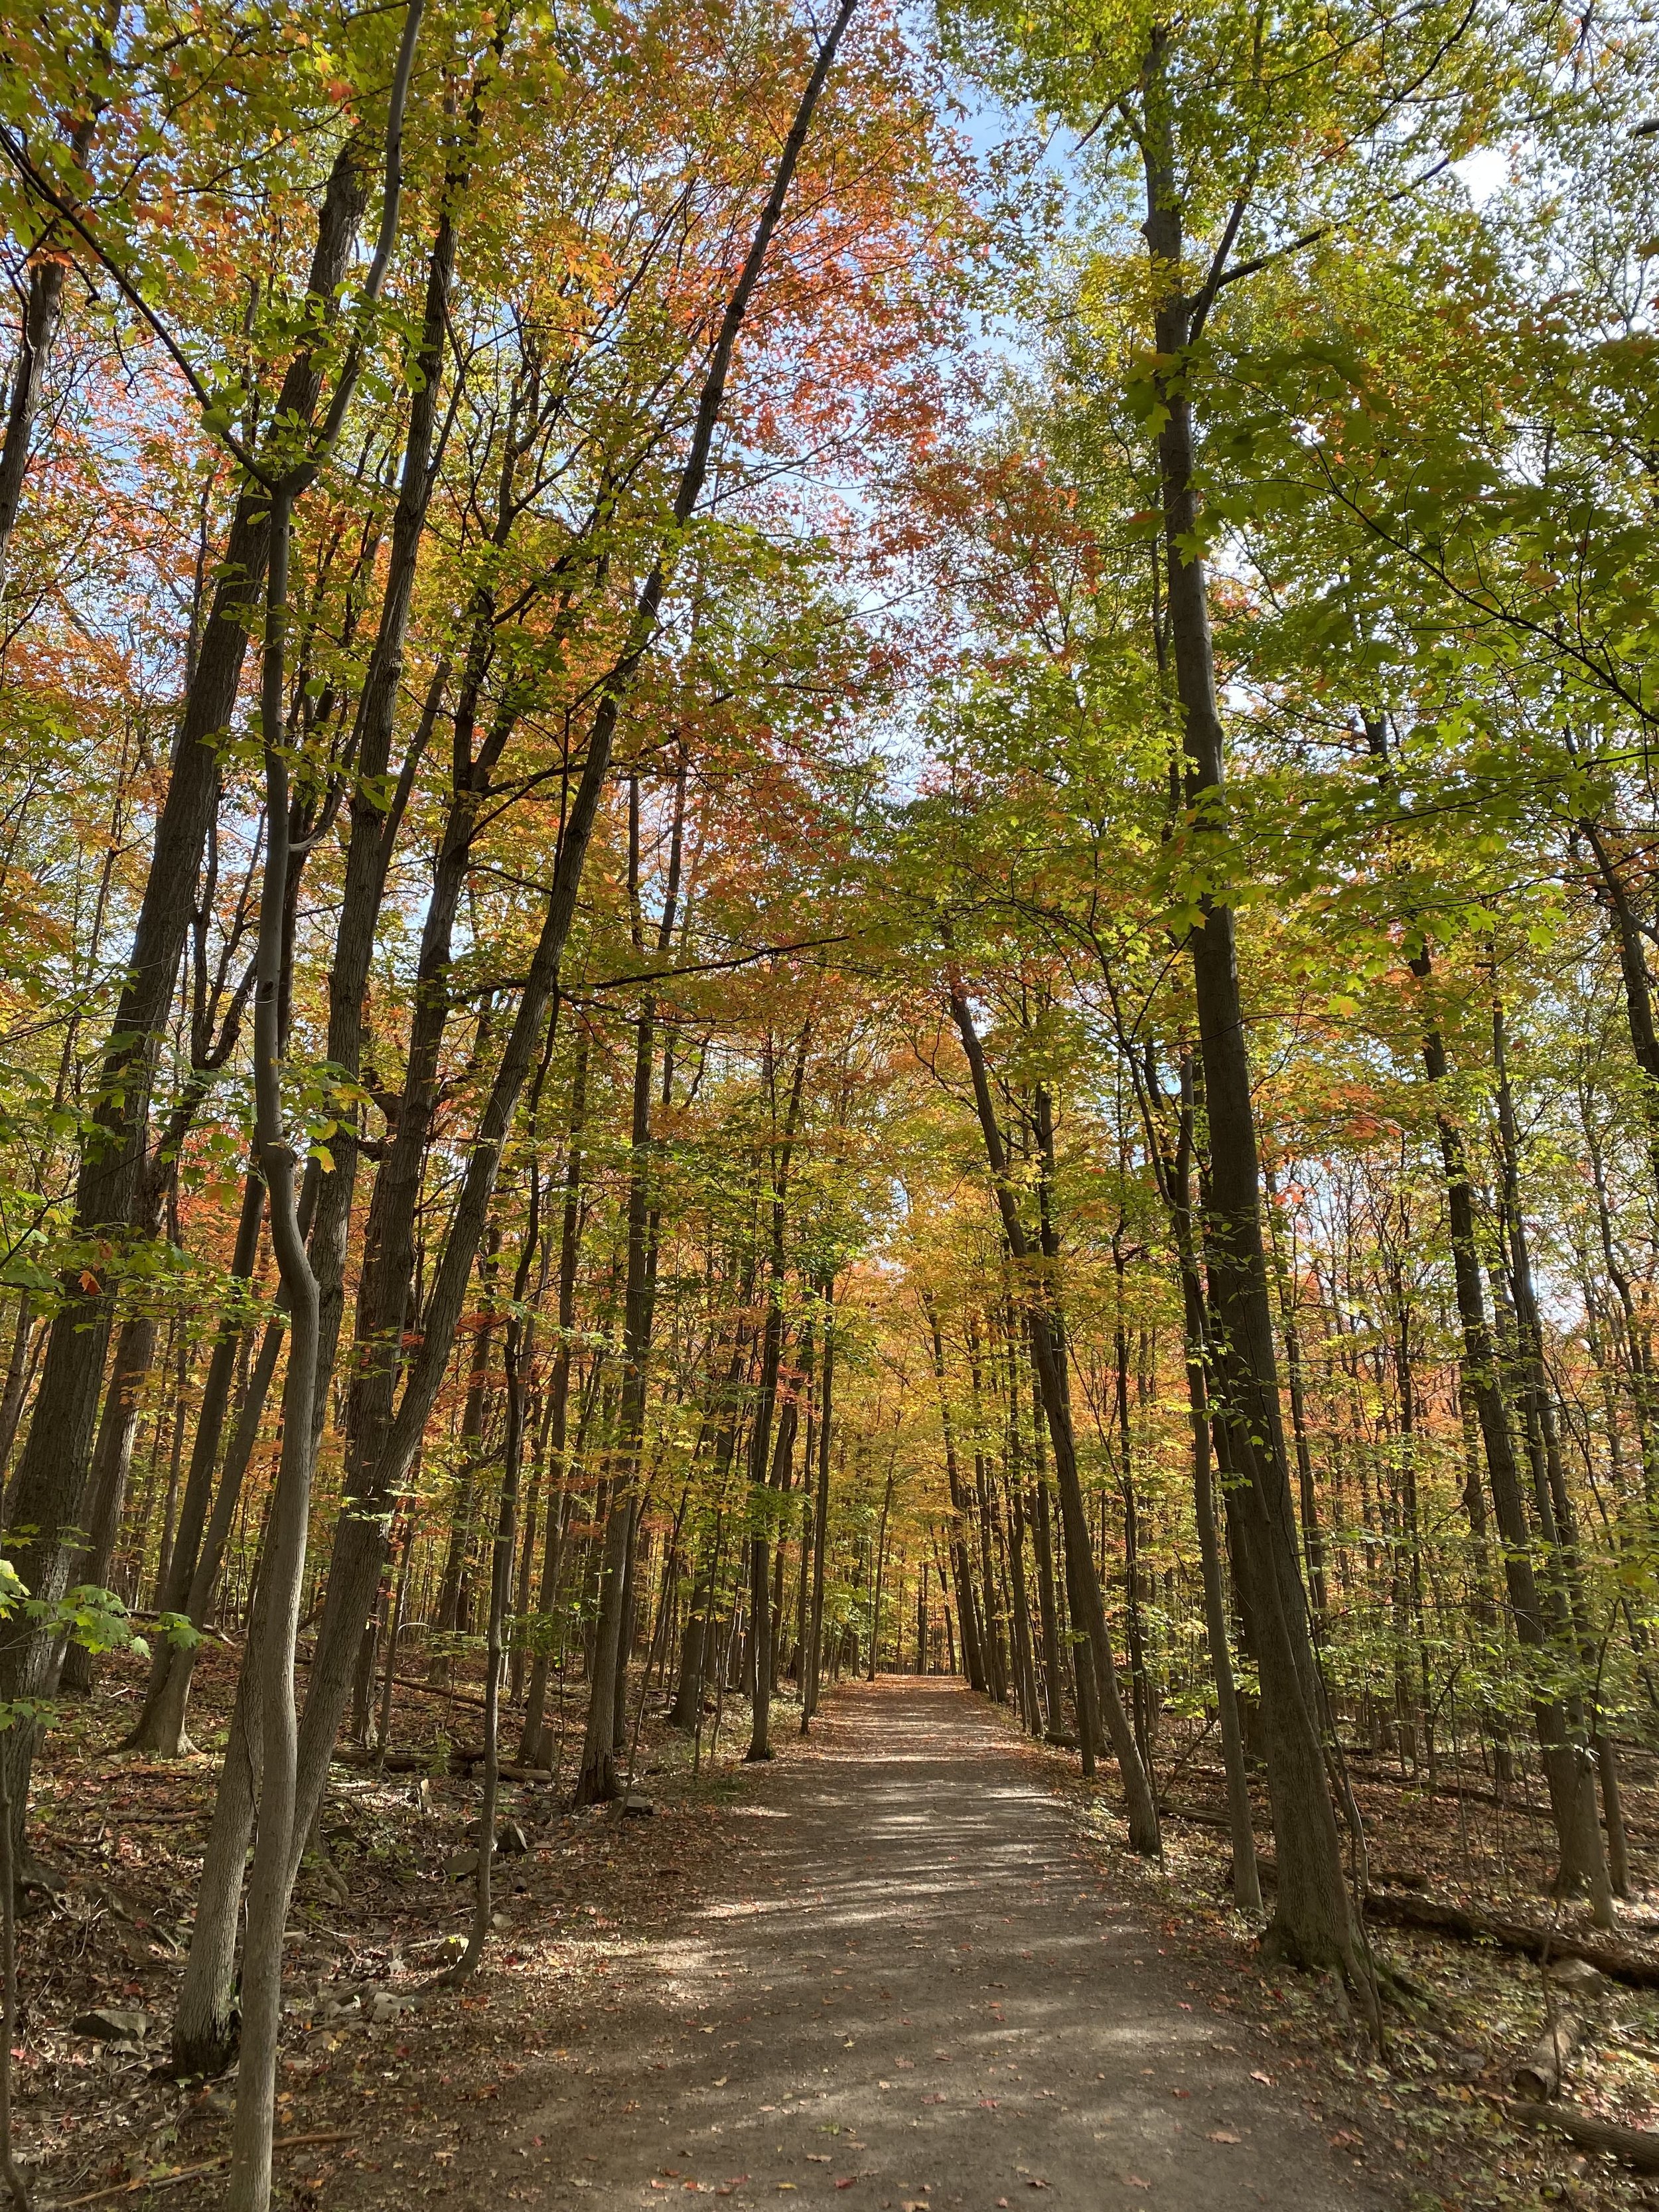 A trail through the woods surrounded in brightly colored fall leaves.